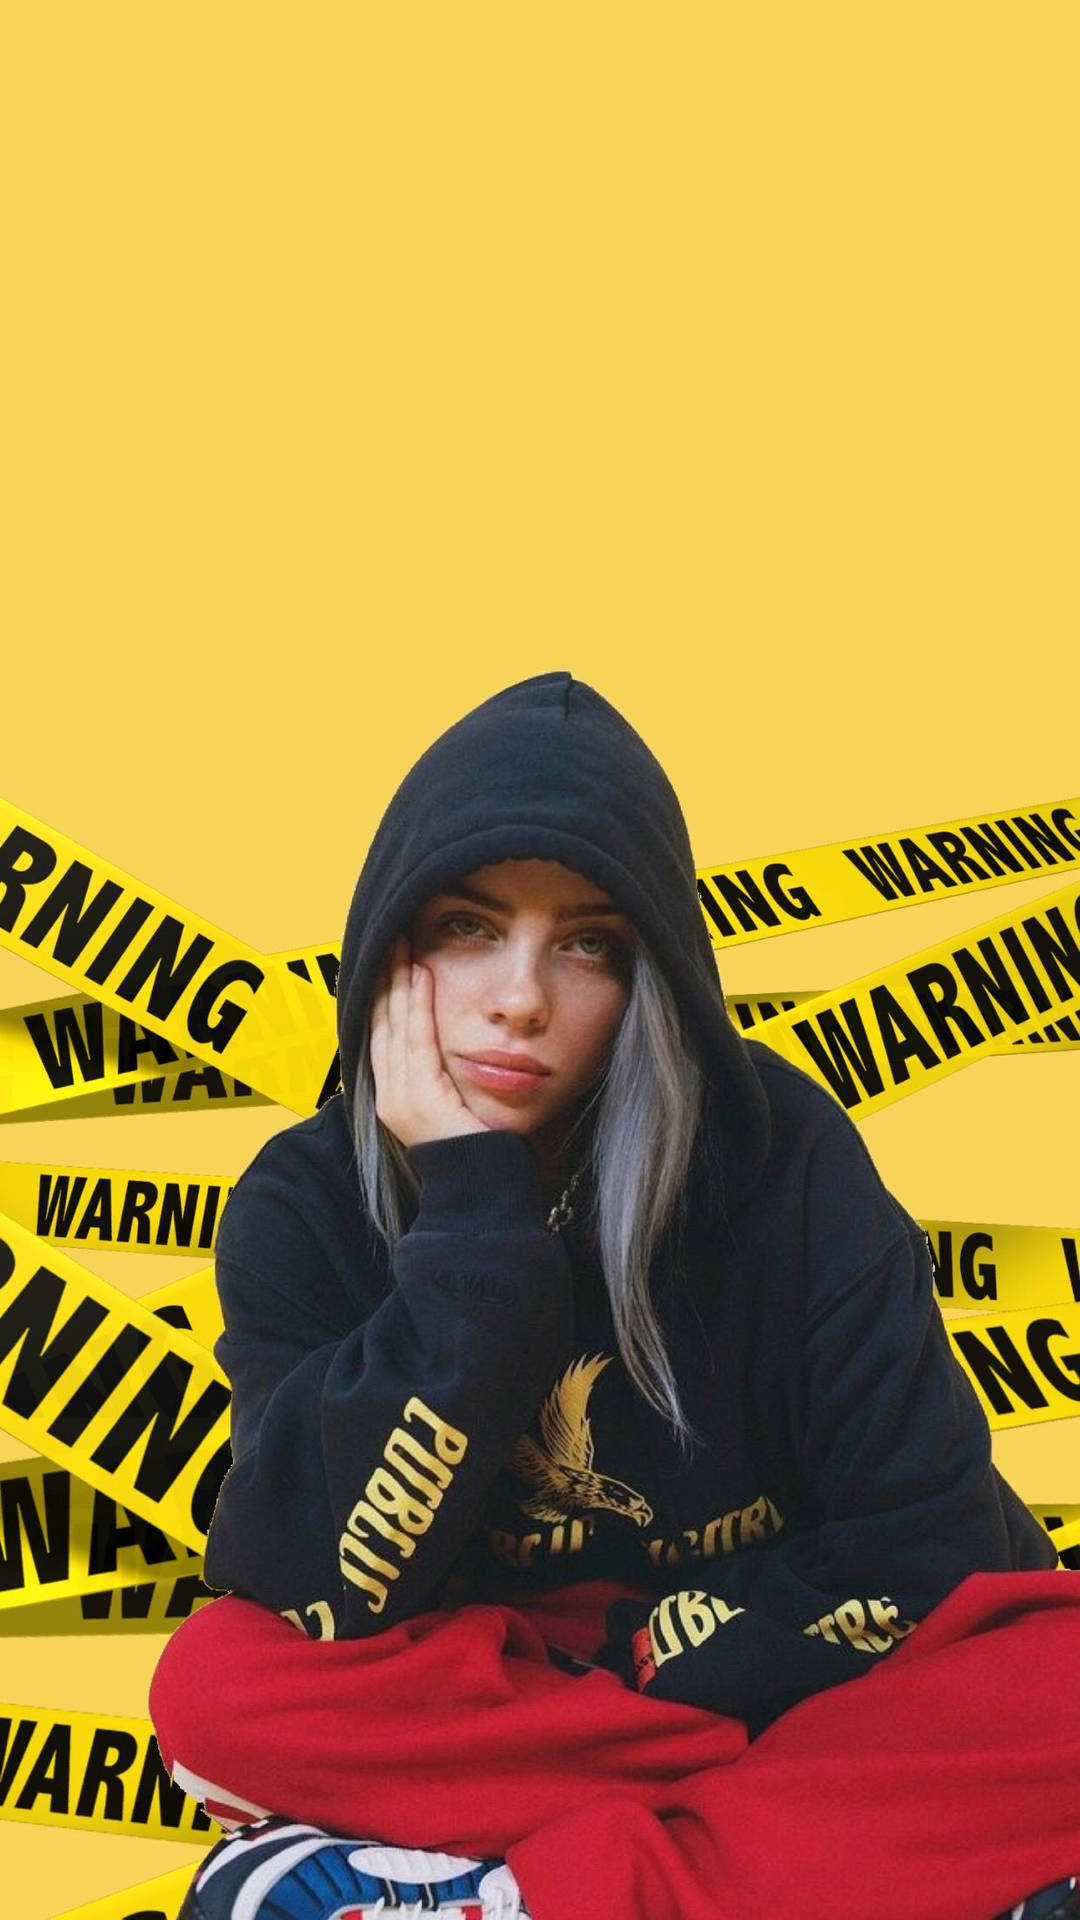 A Girl Sitting In Front Of A Warning Tape Background